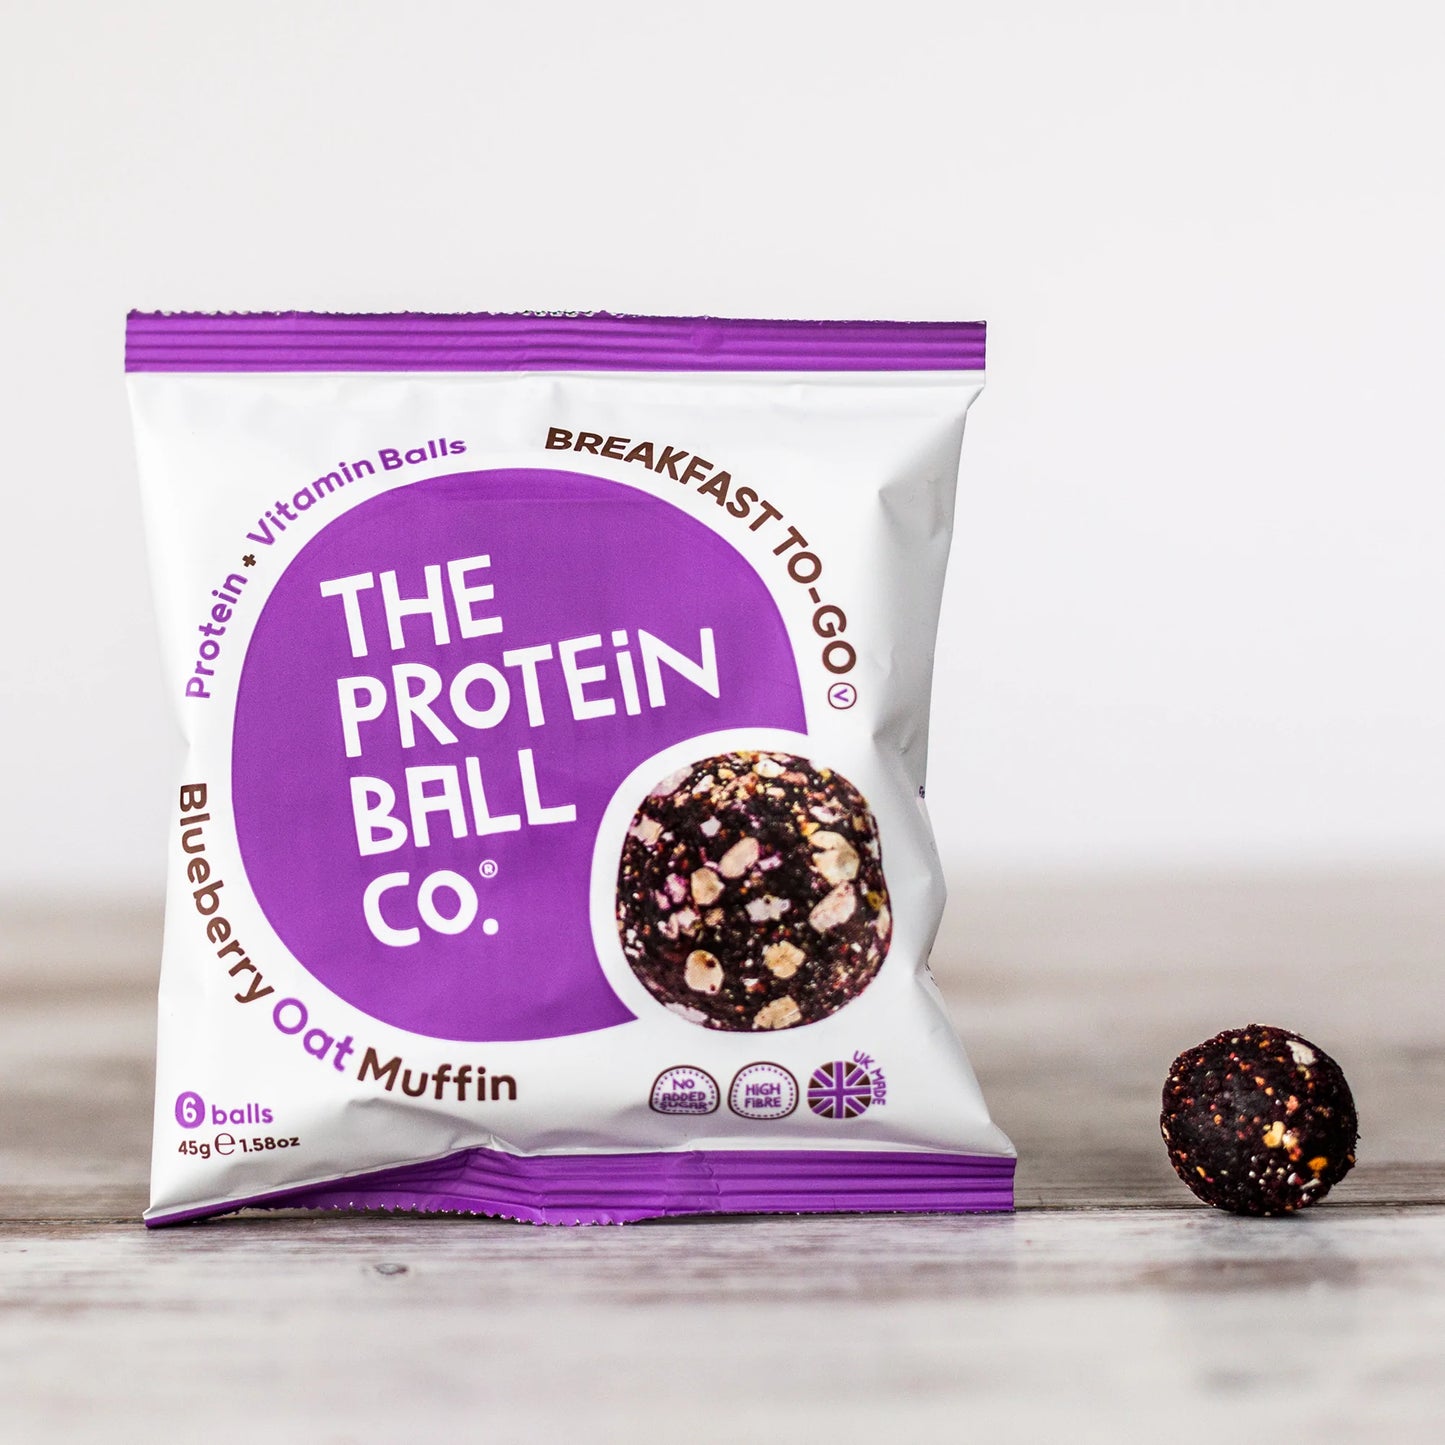 Blueberry Oat Muffin Protein Balls (10 bags)